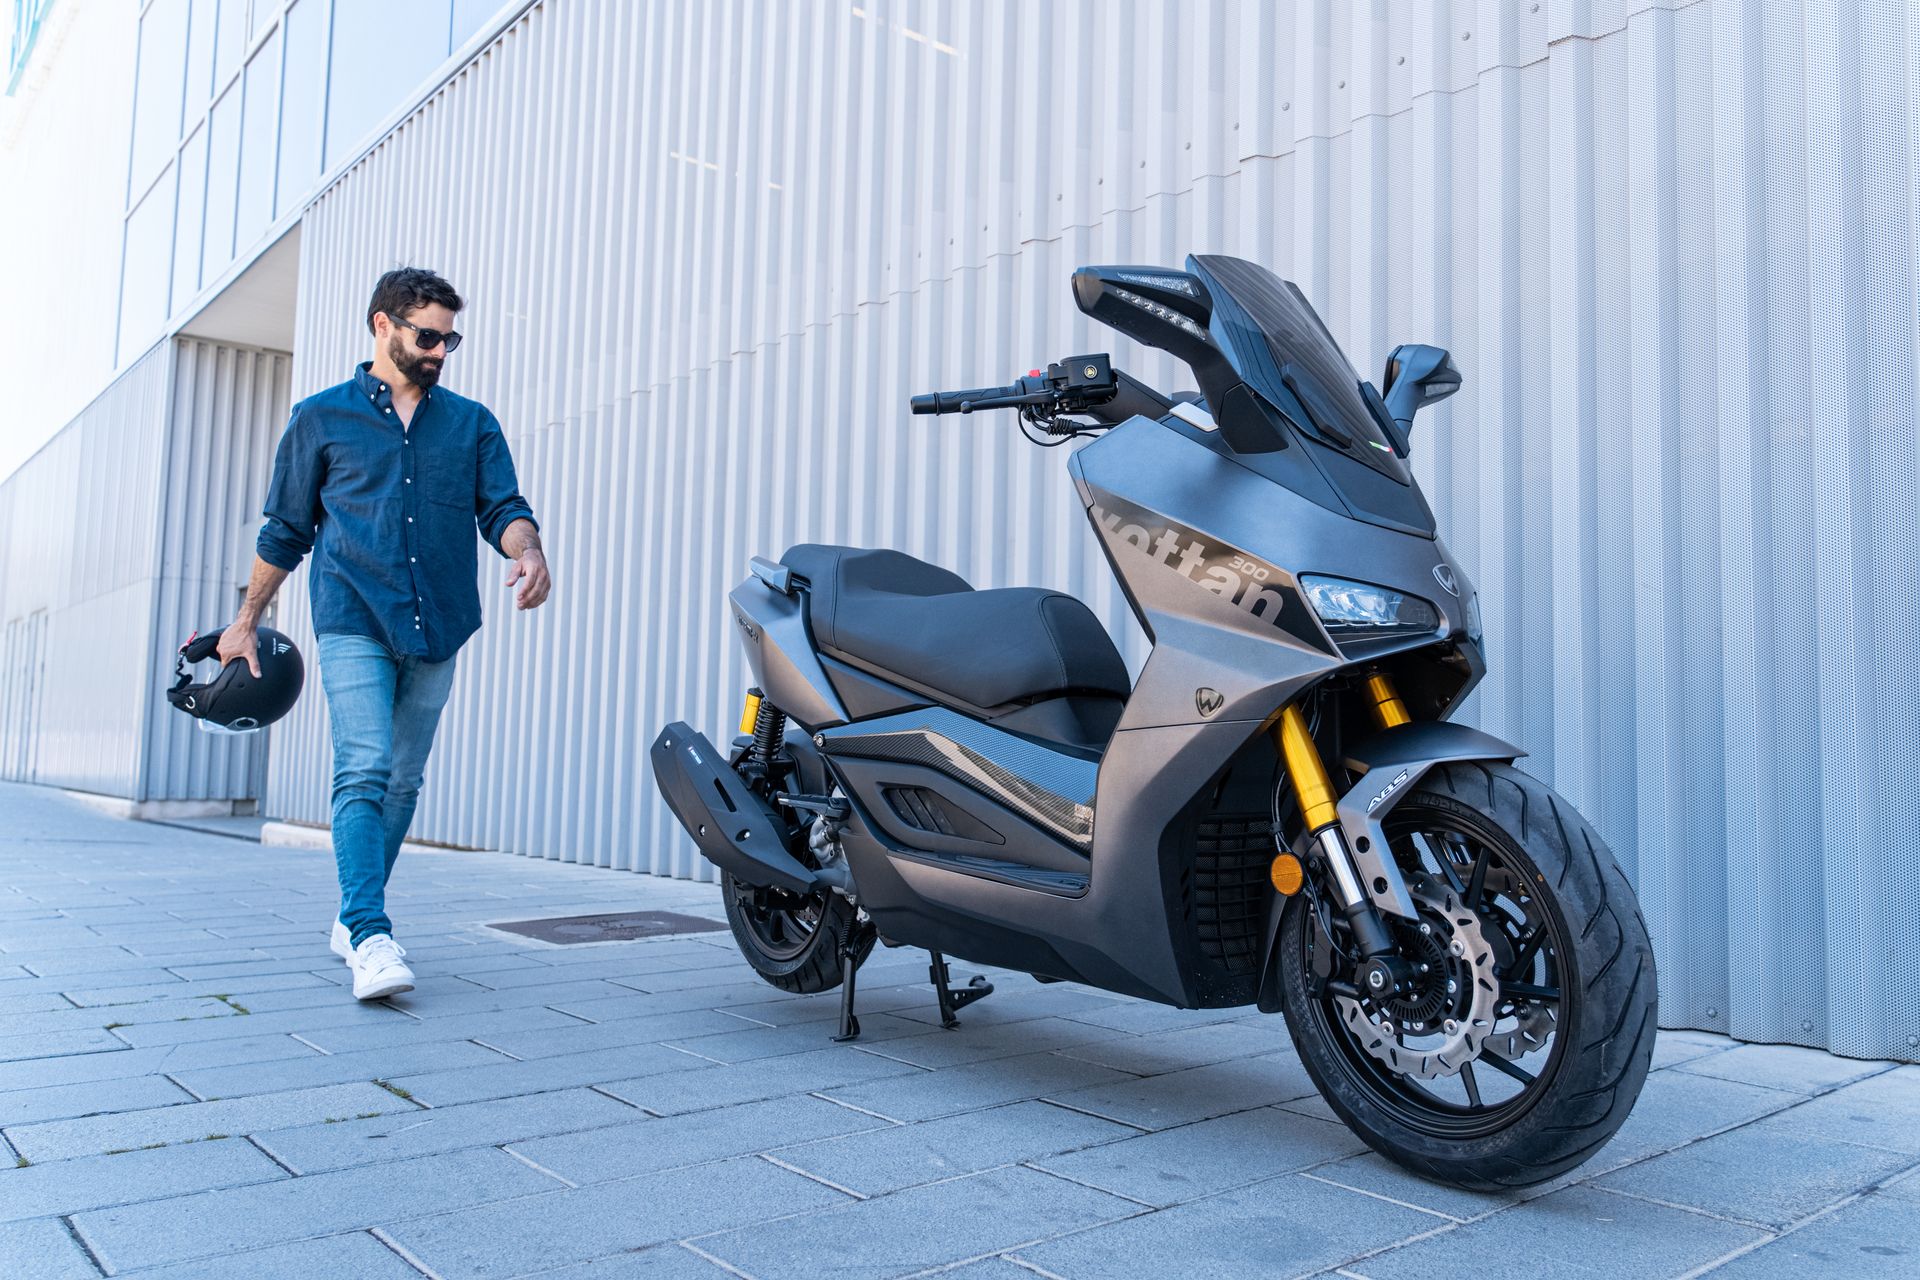 [STORM-R 300 maxi-sports scooter] Combines the speed and thrill of racing with the comfort and practicality of a scooter.